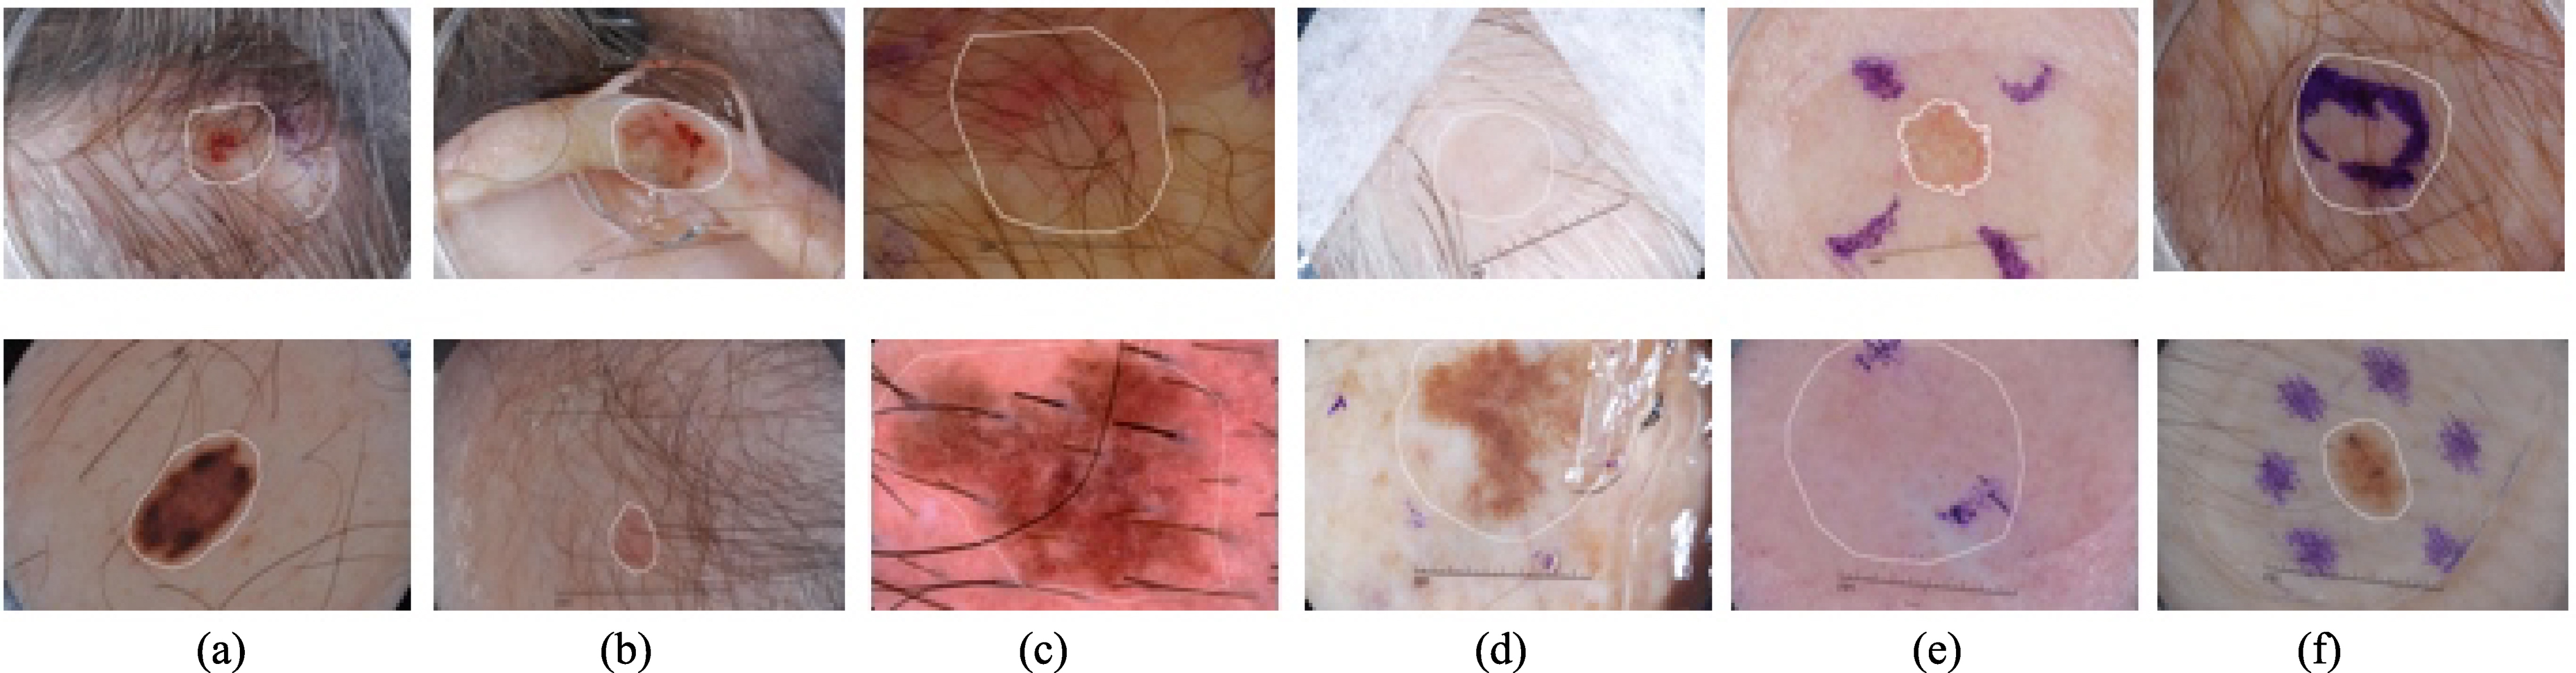 Illustration of challenges of automatic segmentation of skin lesions in dermoscopy images. The main challenge includes distinguishable inter-class, indistinguishable intra-class variations, artifacts and inherent cutaneous features in natural images. (a–c) skin lesions are covered with hairs or exploded with blood vessels; (d) air bubbles and marks occlude the skin lesions; (e–f) dye concentration downgrades the segmentation accuracy. Note that white contours indicate the skin lesions.